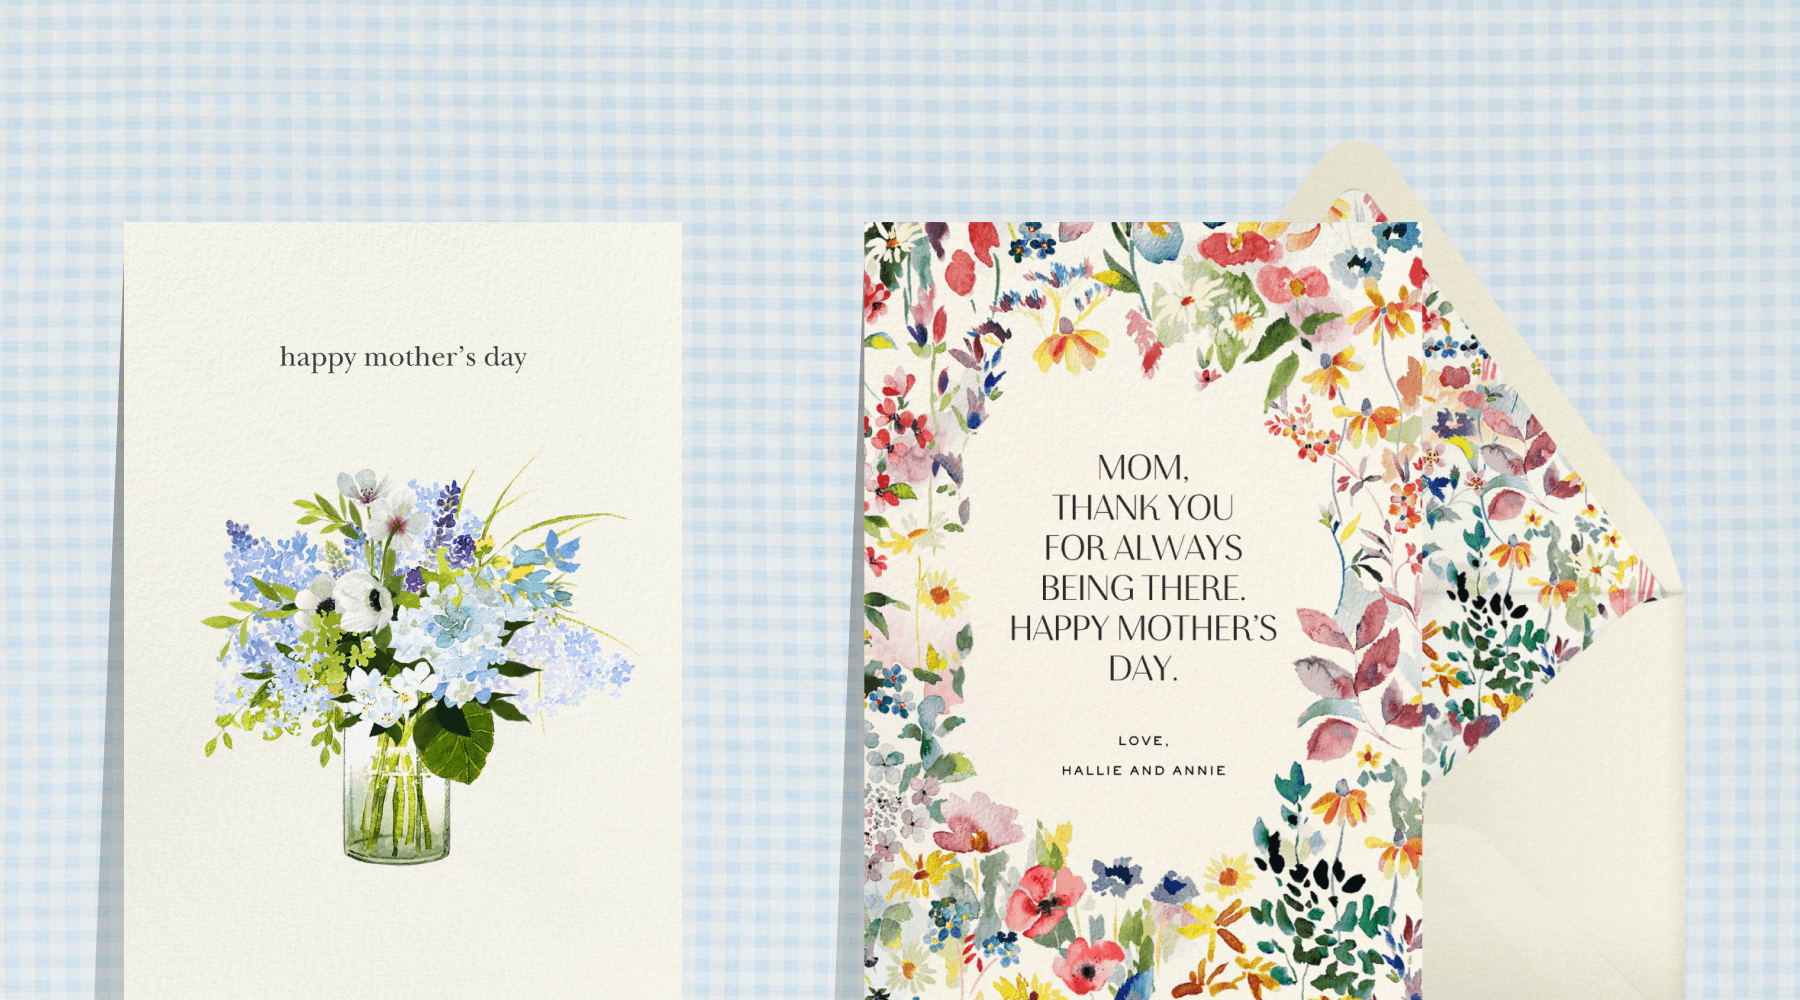 A card with a vase of blue flowers; a card with a colorful floral border.